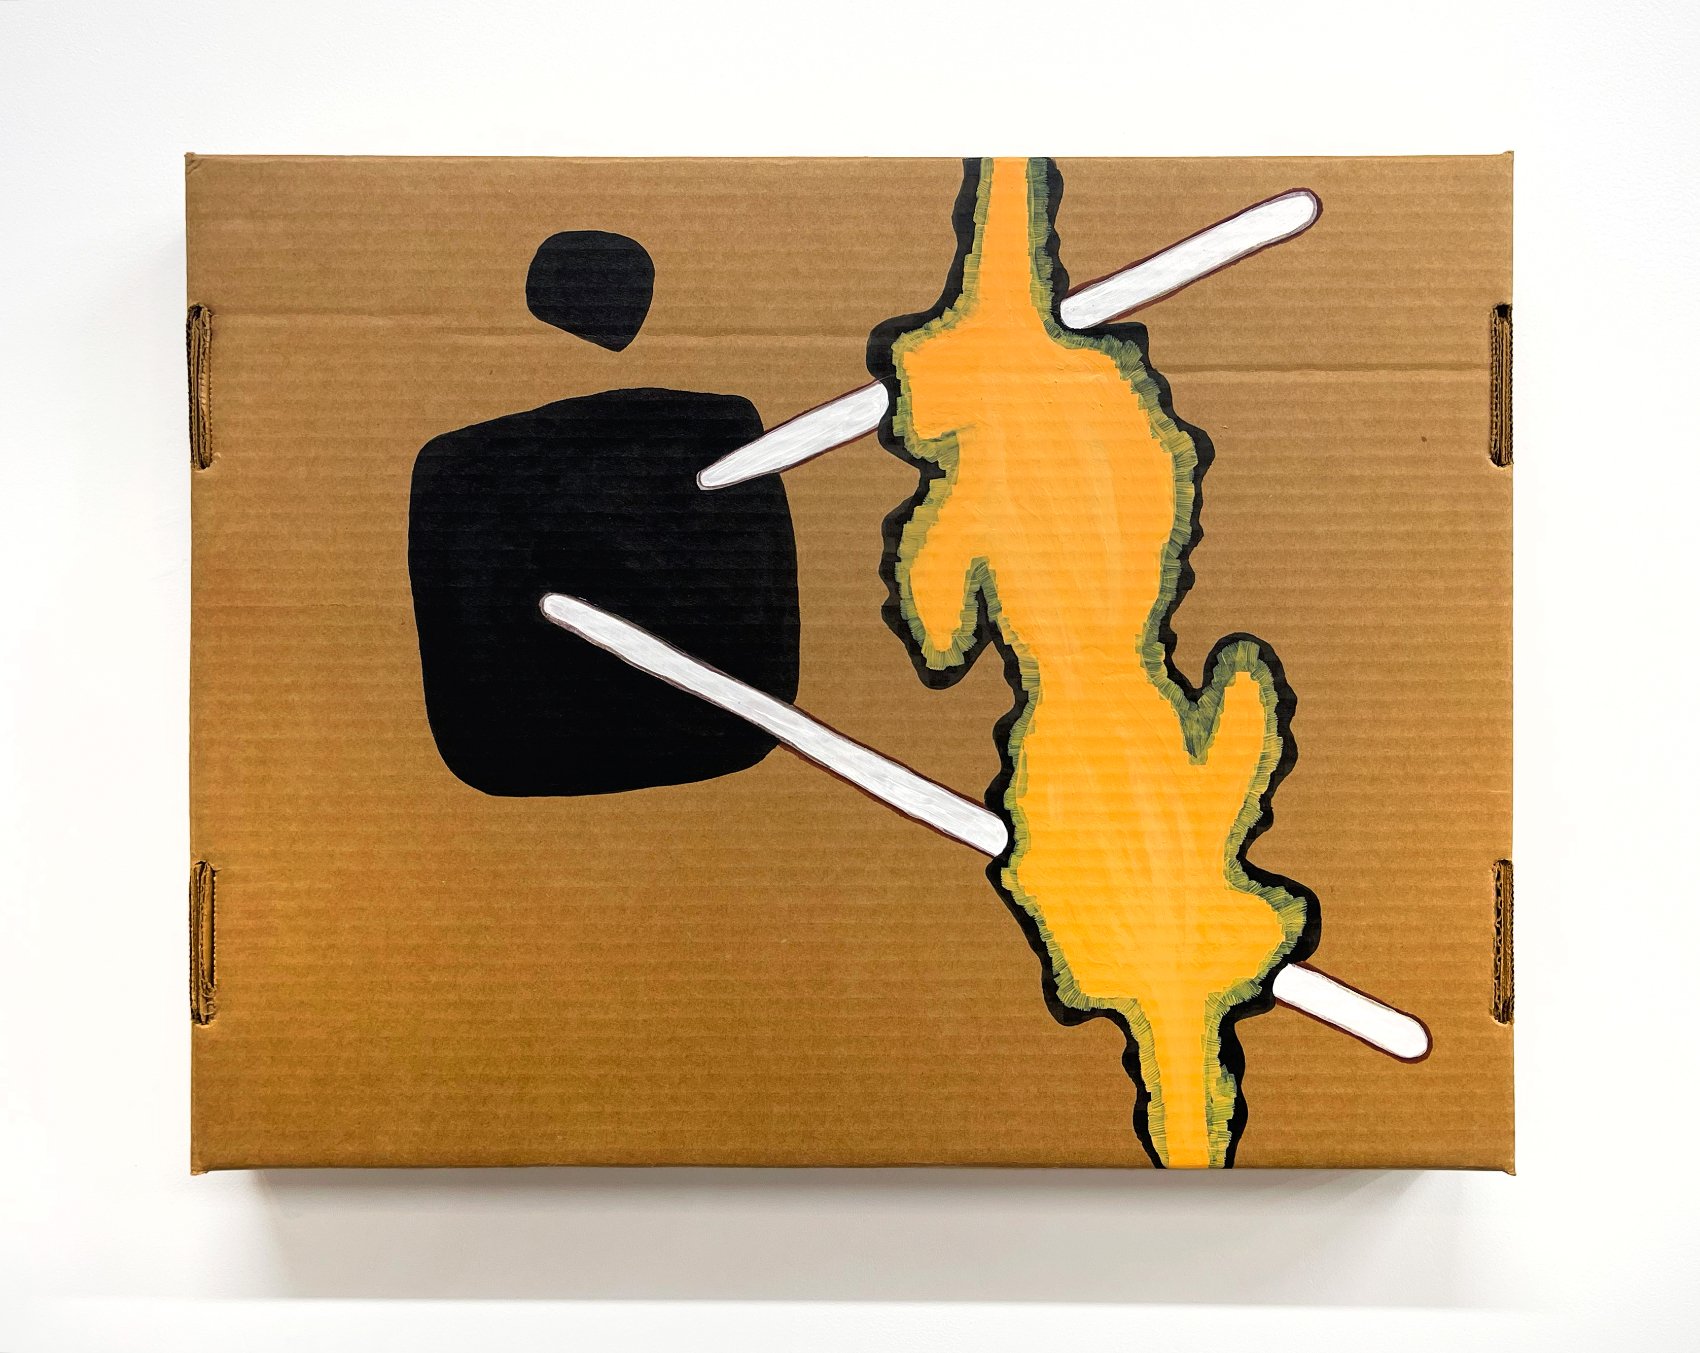  Printout (a nocturne), set 2 14 1/4 x 18 1/4 x 2 inches, Paint, ink, pen on cardboard, 2005 